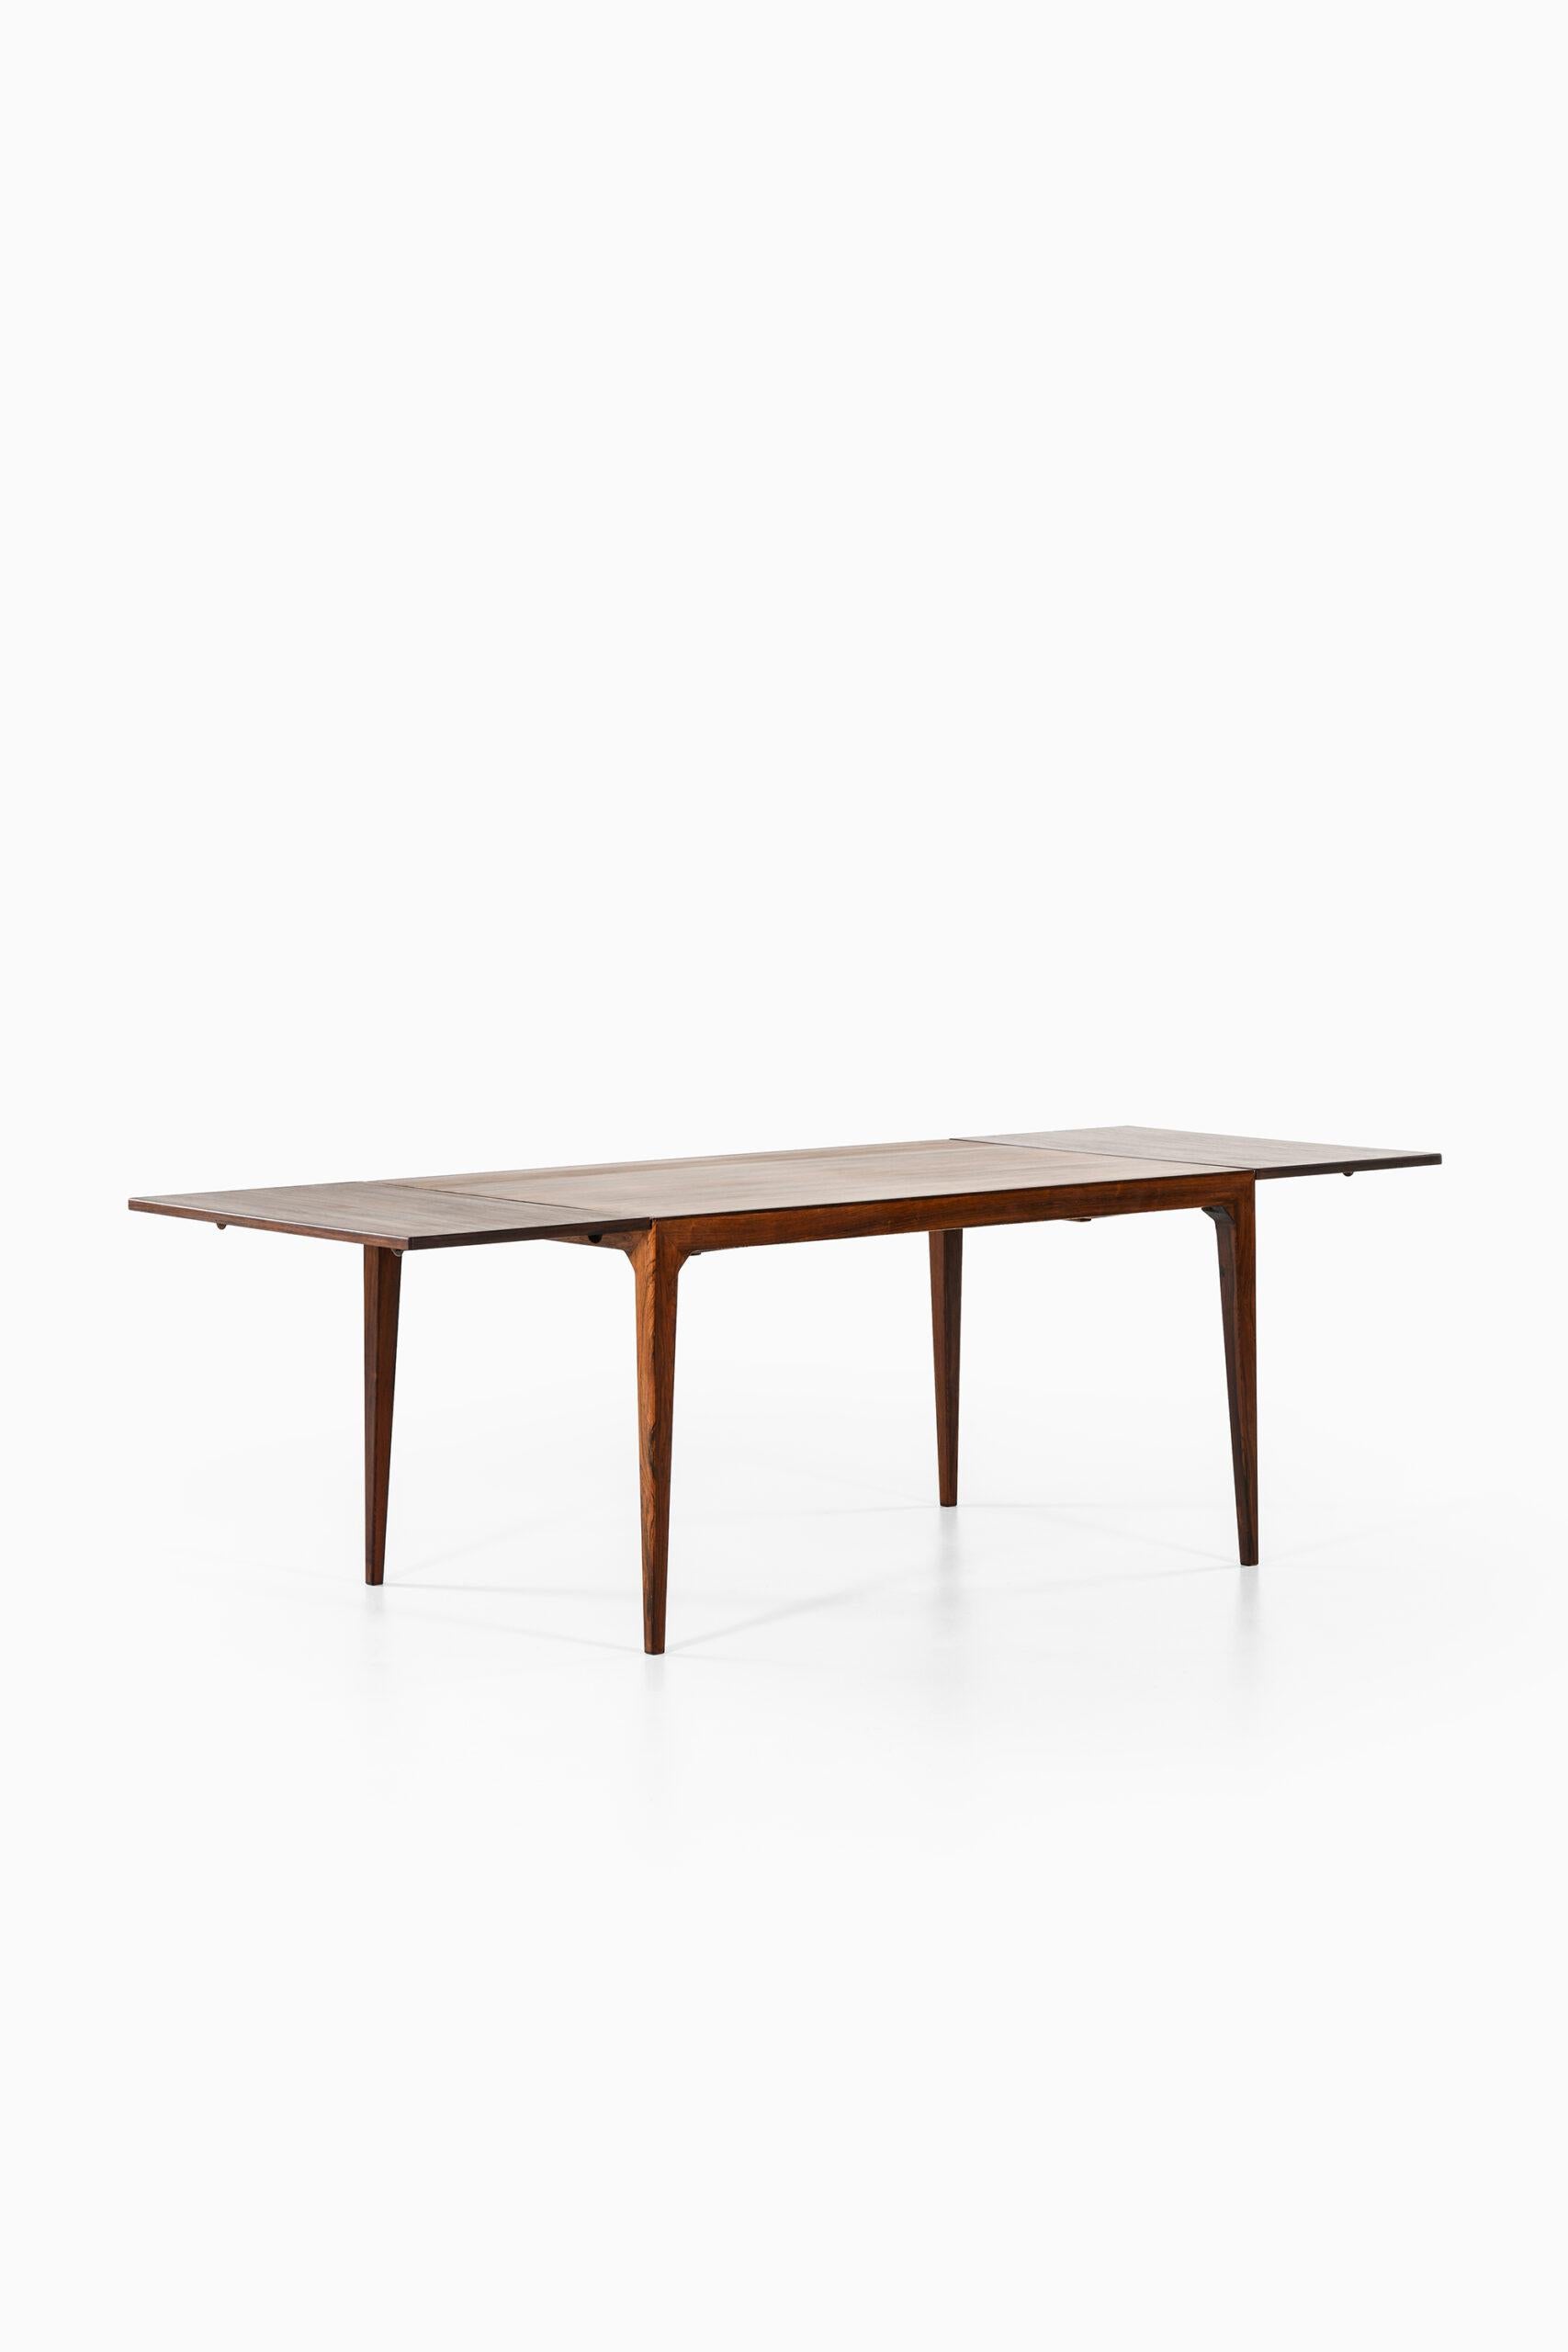 Rosewood Poul Hundevad & Kai Winding Dining- / Work Table Produced by Poul Hundevad & Co For Sale